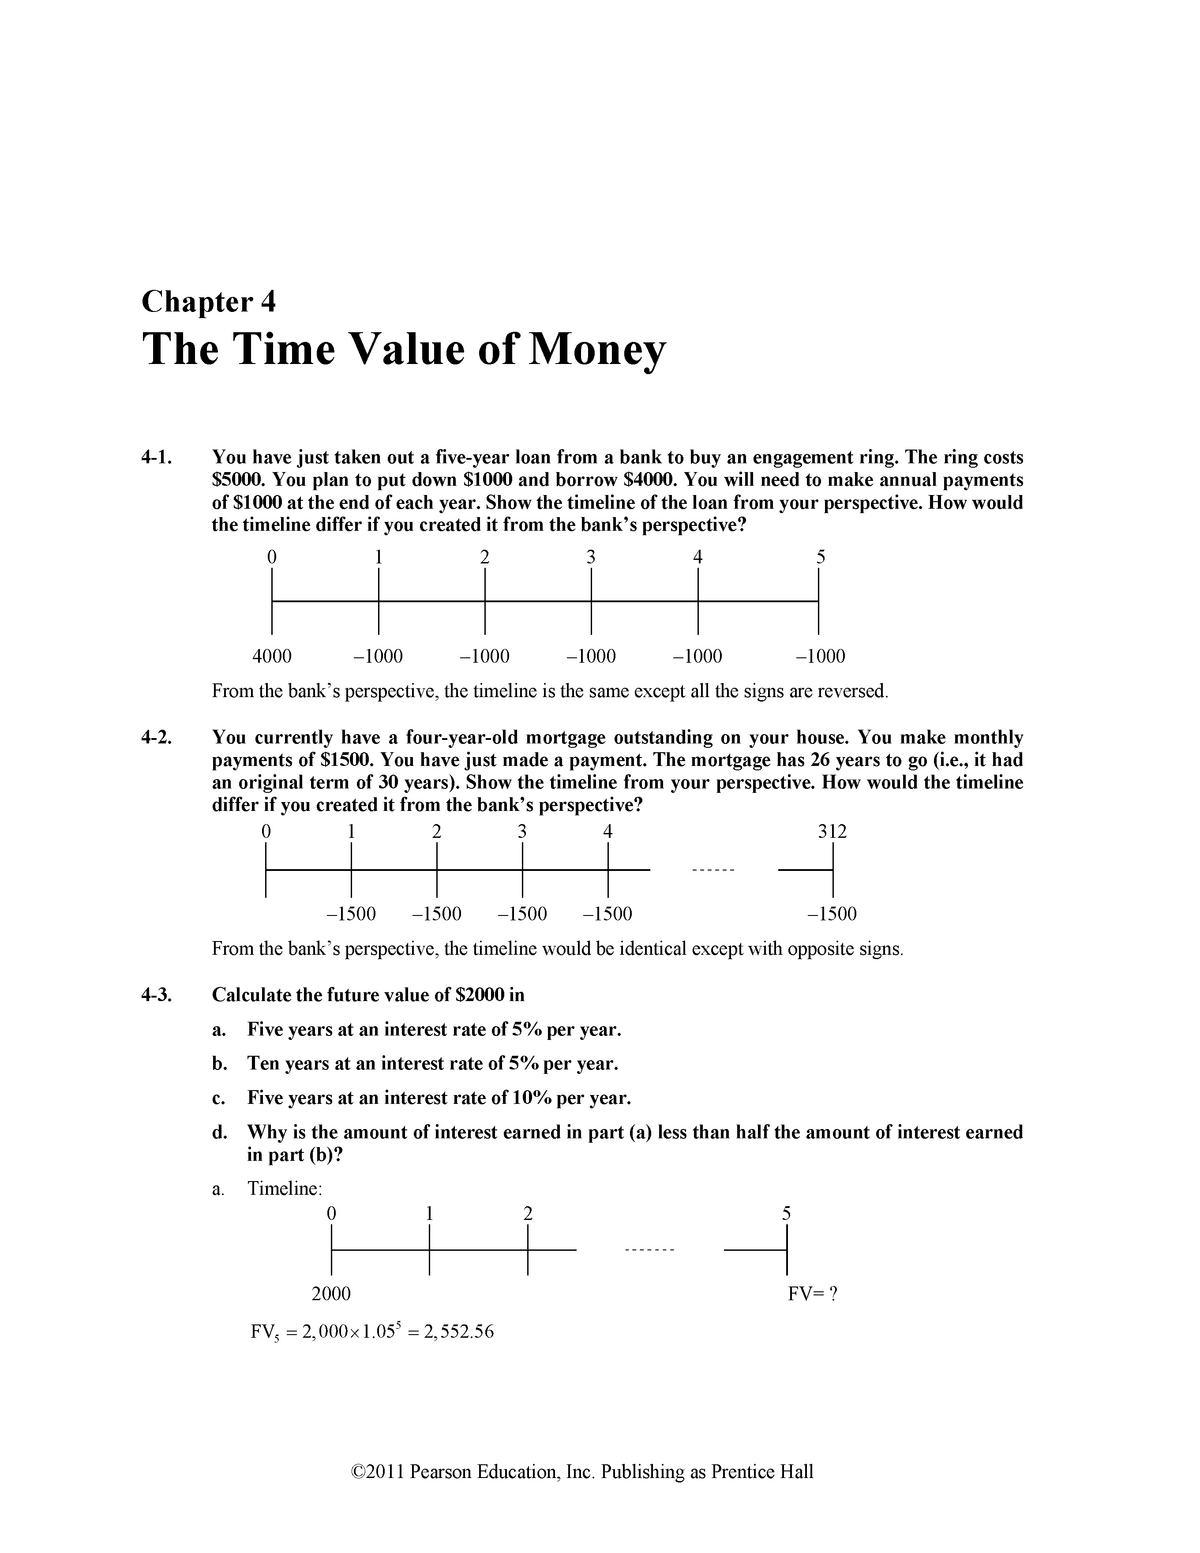 chap-4-solution-chapter-4-the-time-value-of-money-4-1-you-have-just